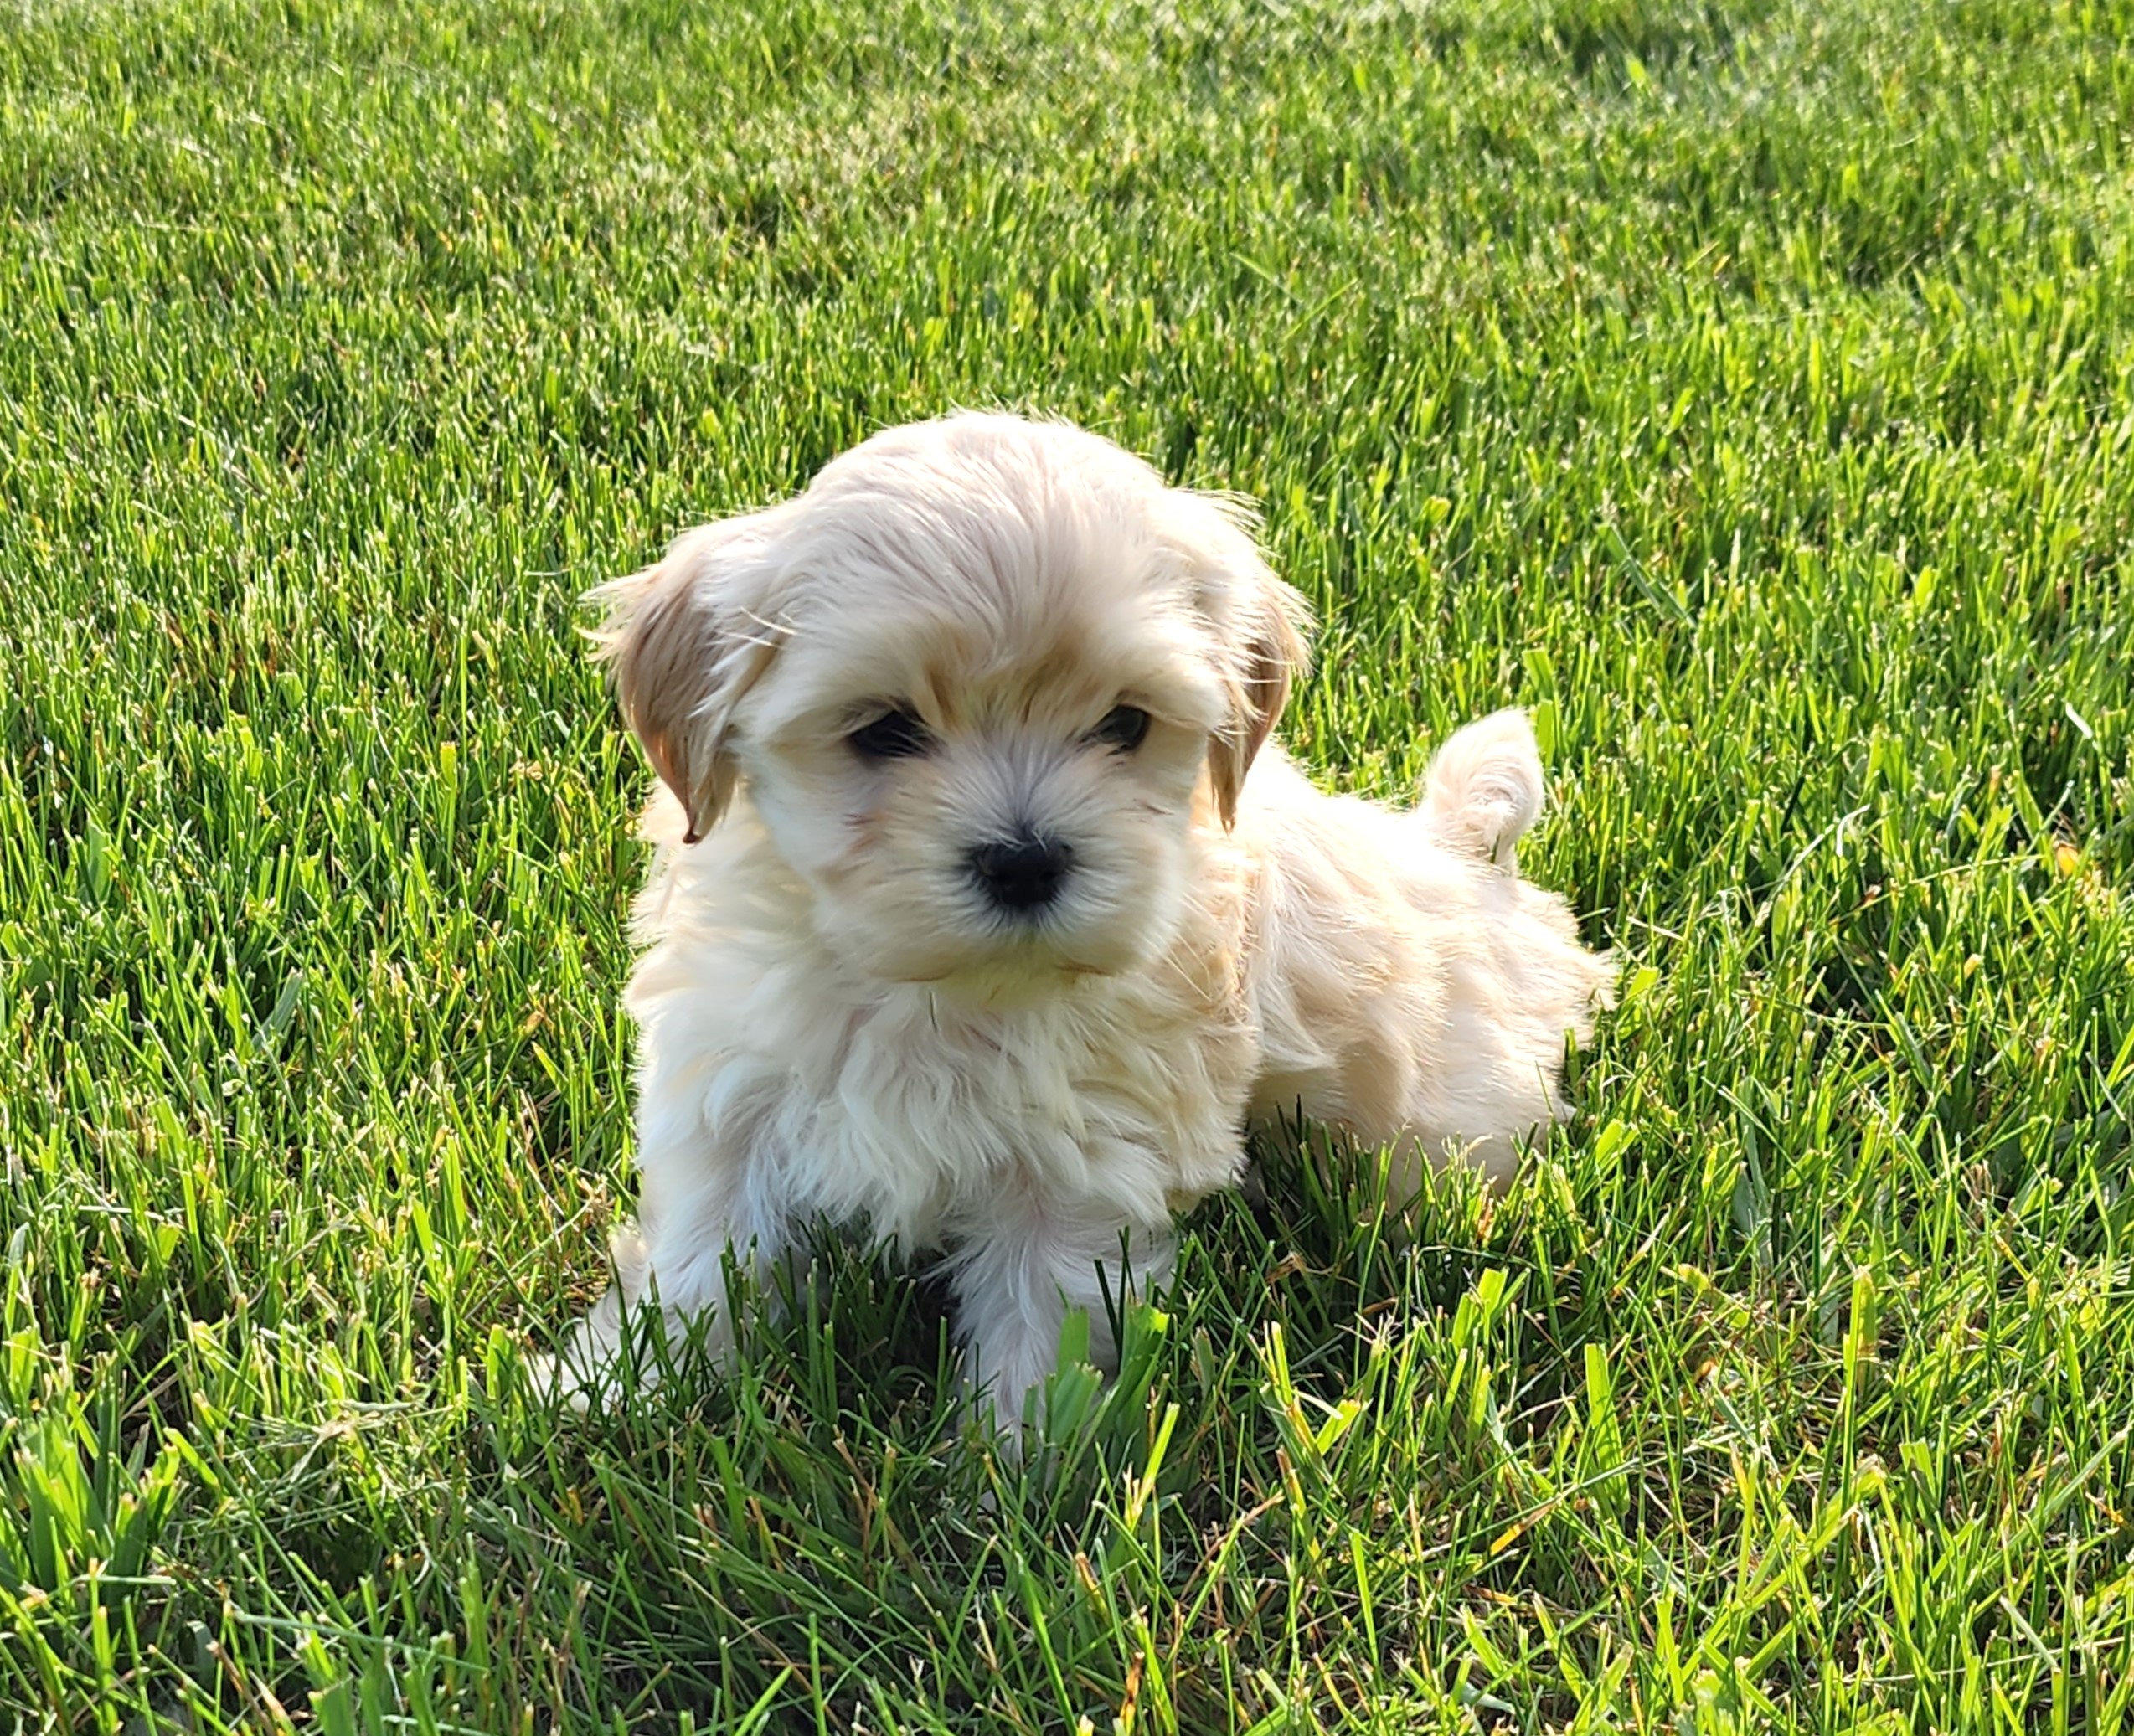 "Orchid" DOB: 4/4/2023. Sex: Female. Breed: Havanese. Available June 1, 2023. Price: $1800